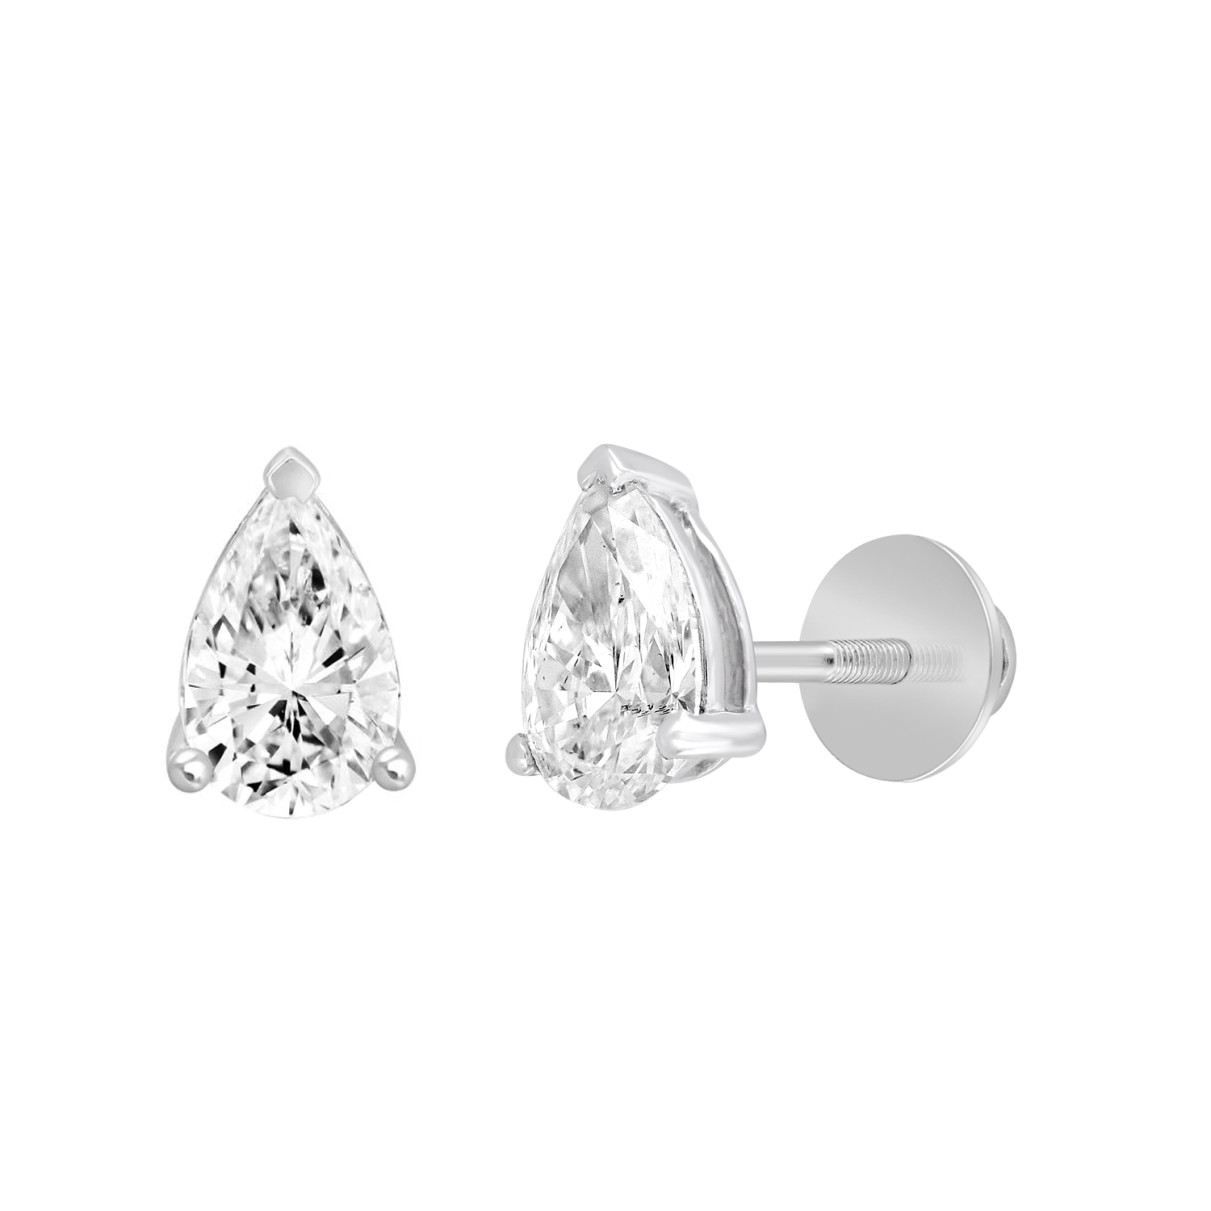 LADIES SOLITAIRE EARRINGS 2CT PEAR DIAMOND 14K WHITE GOLD